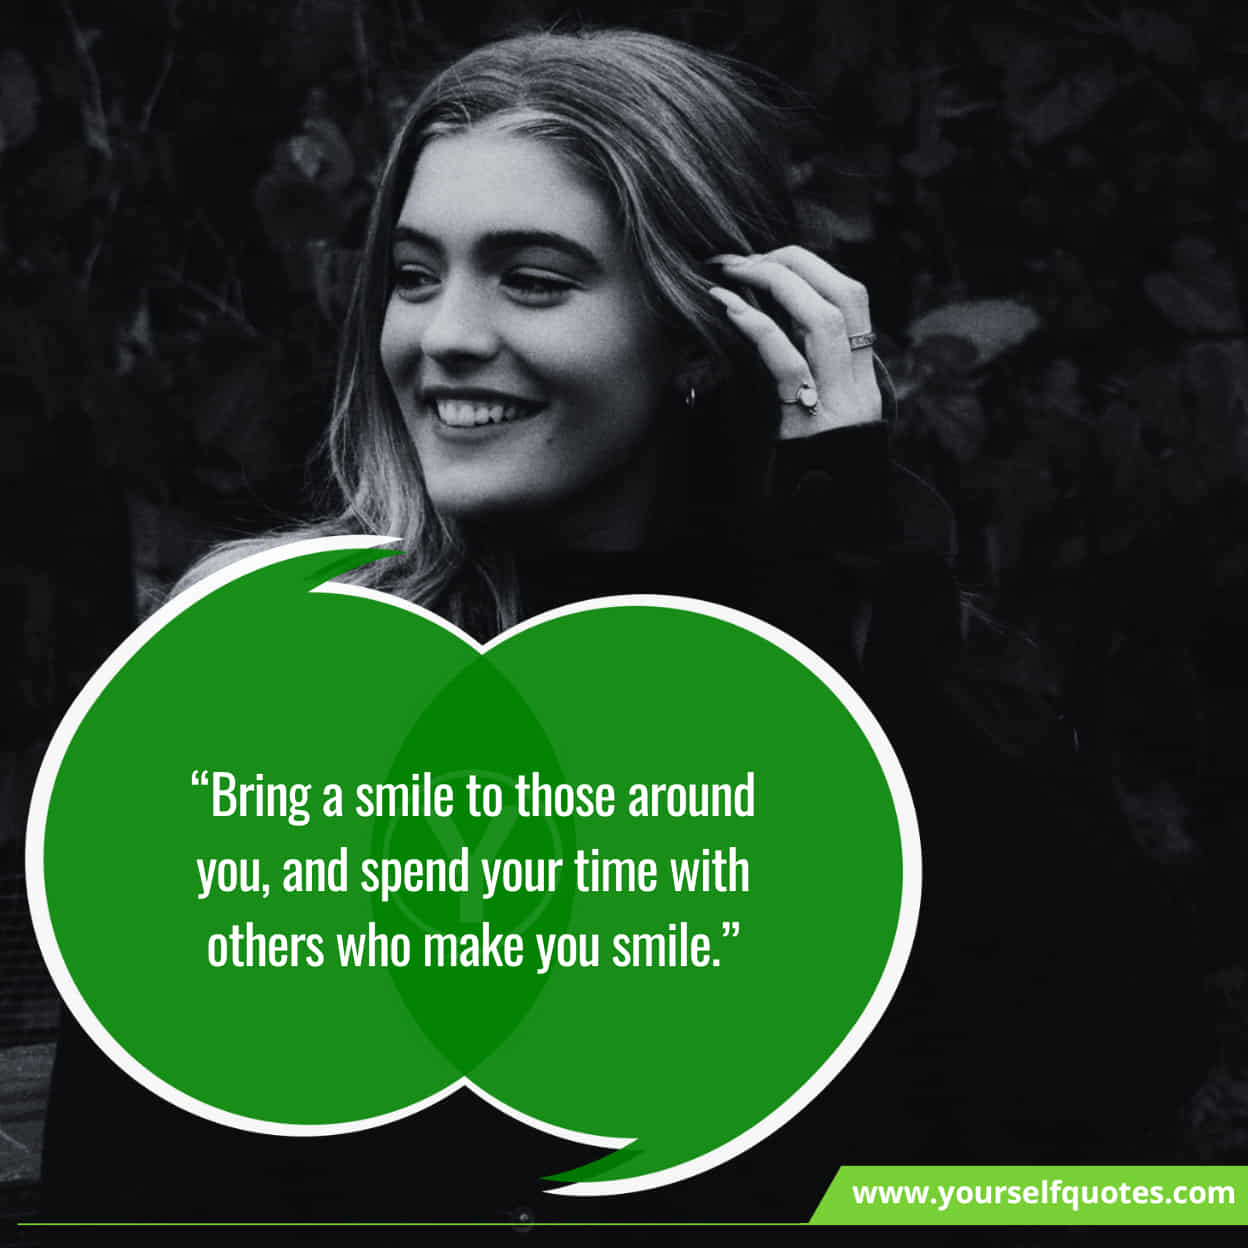 Inspiring Quotes About Smile